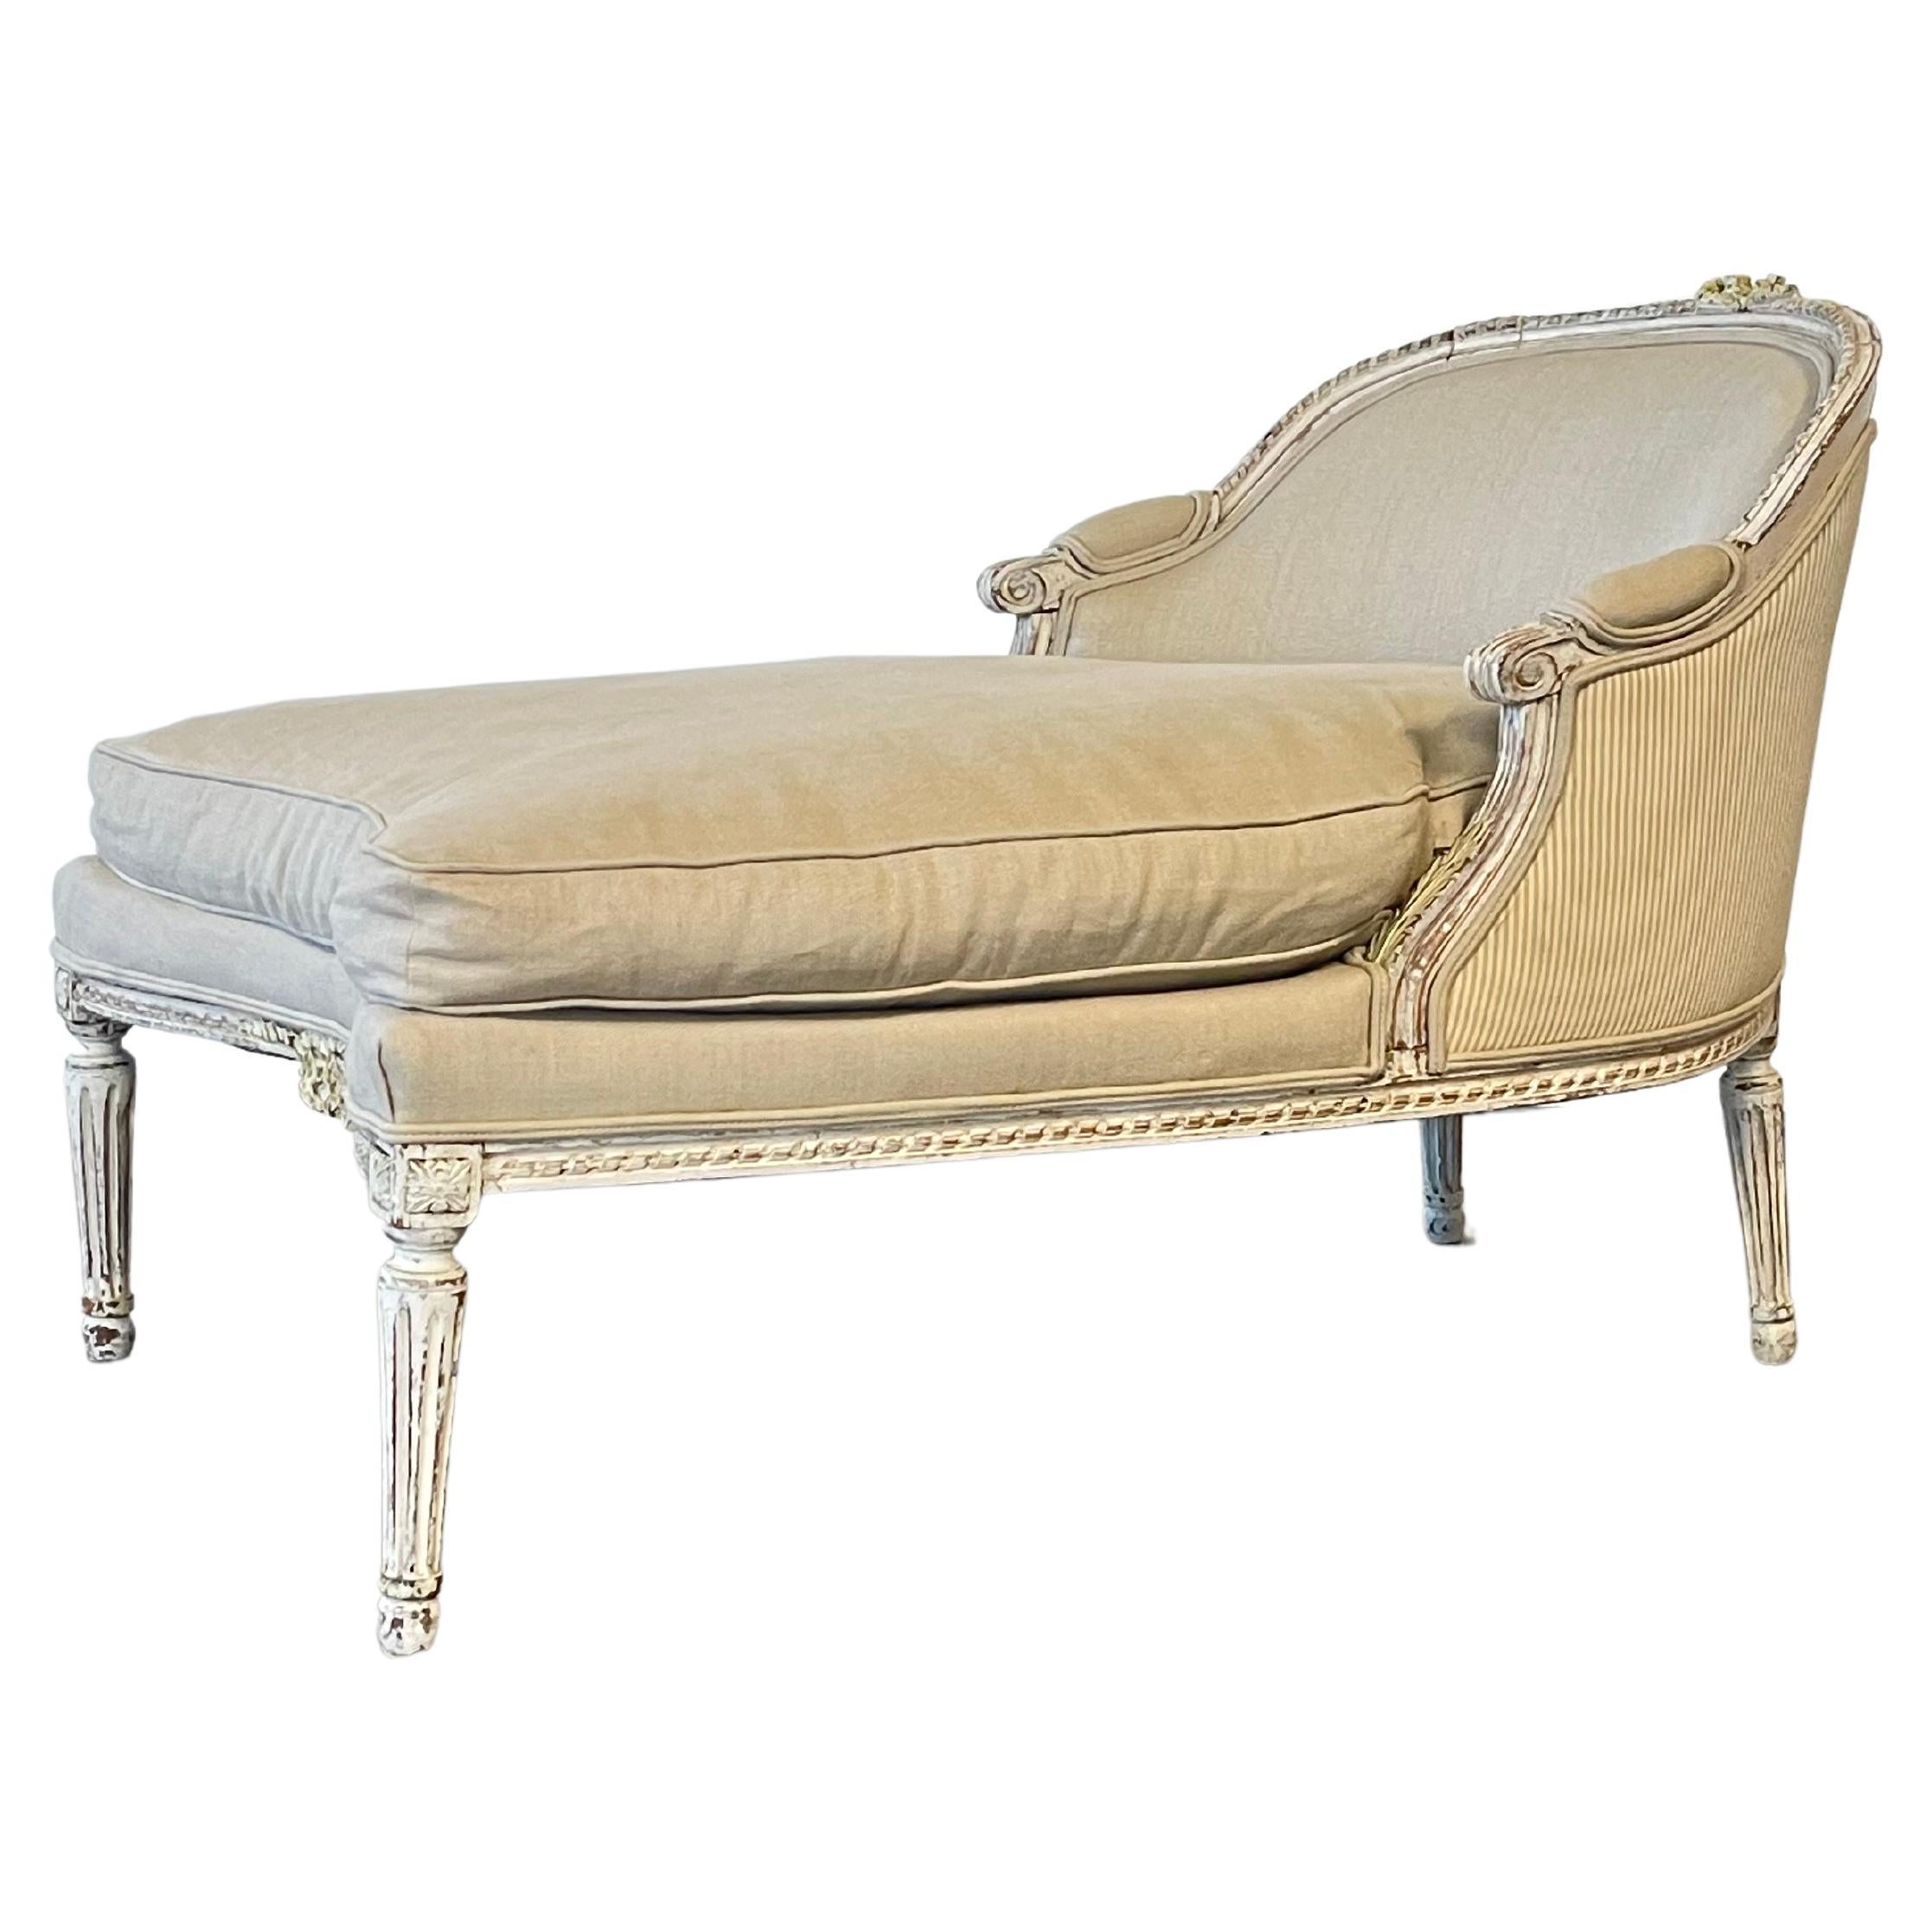 Beautiful French Louis XVI Chaise Lounge Upholstered in Thick Linen For Sale